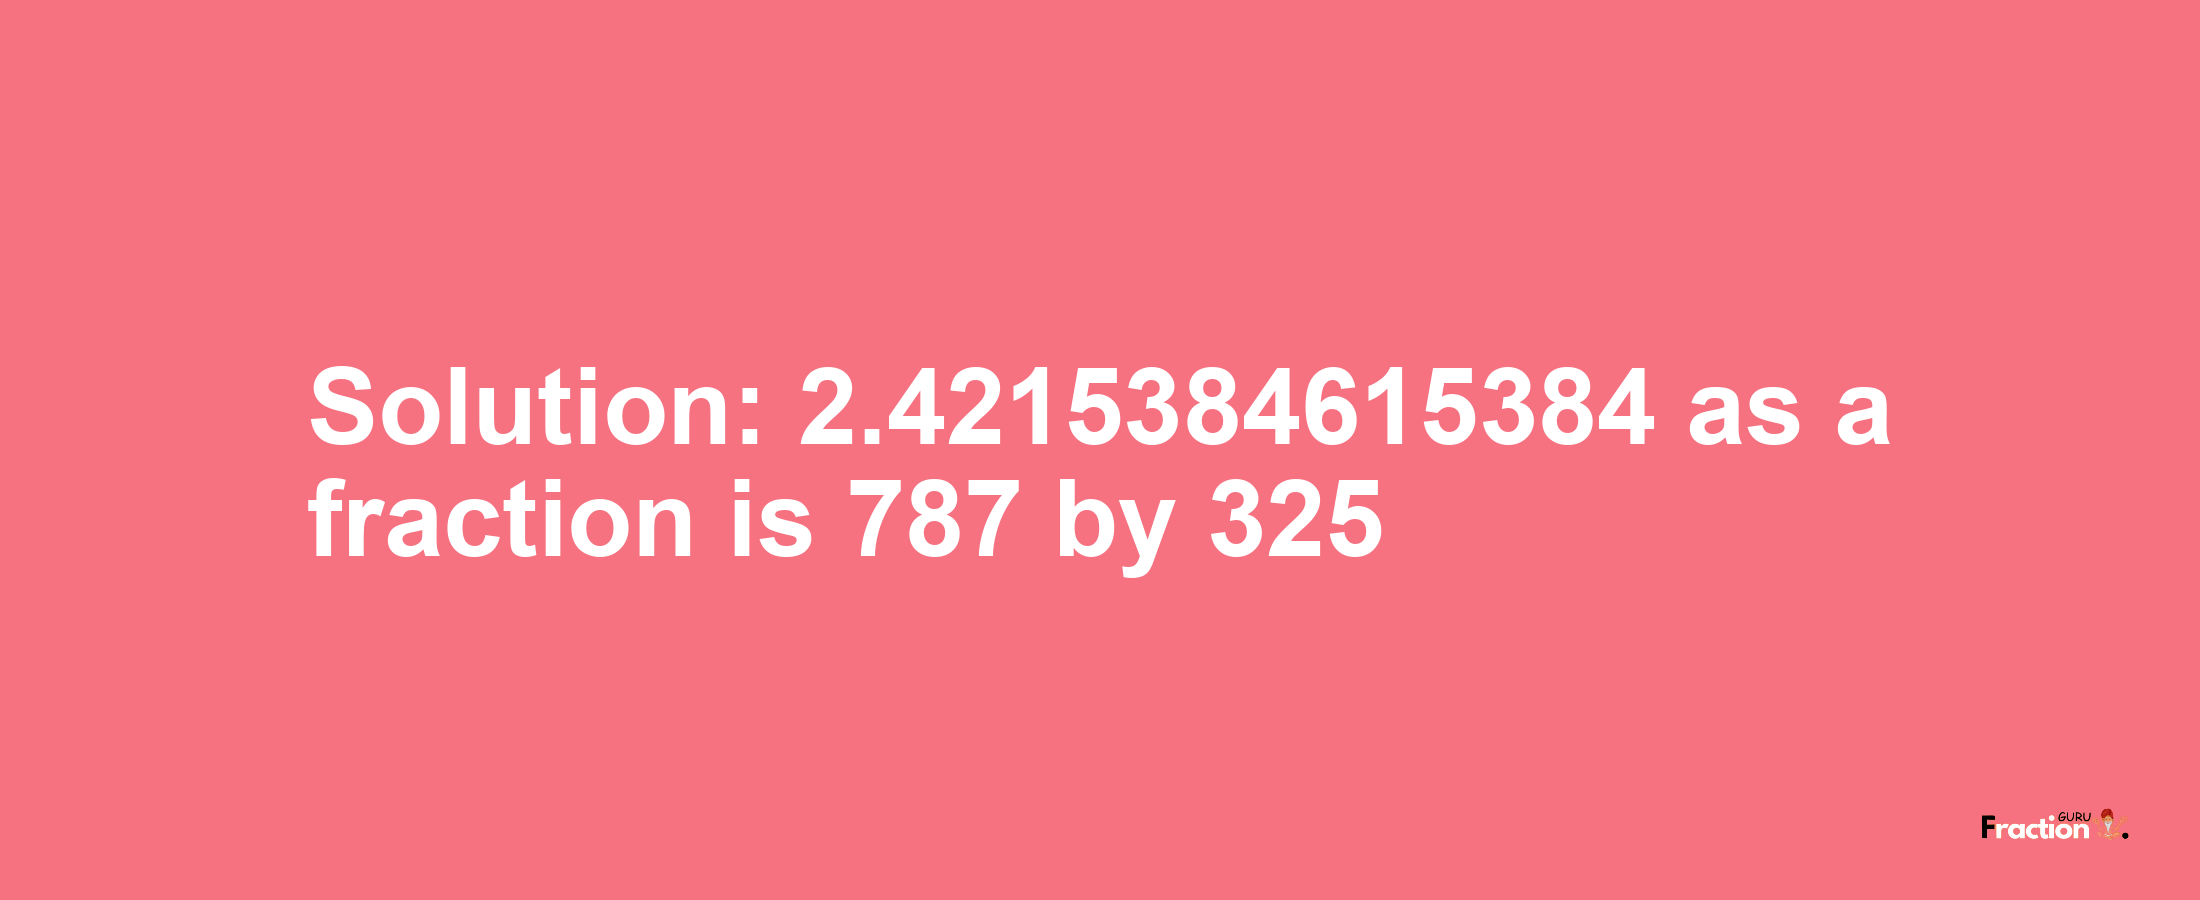 Solution:2.4215384615384 as a fraction is 787/325